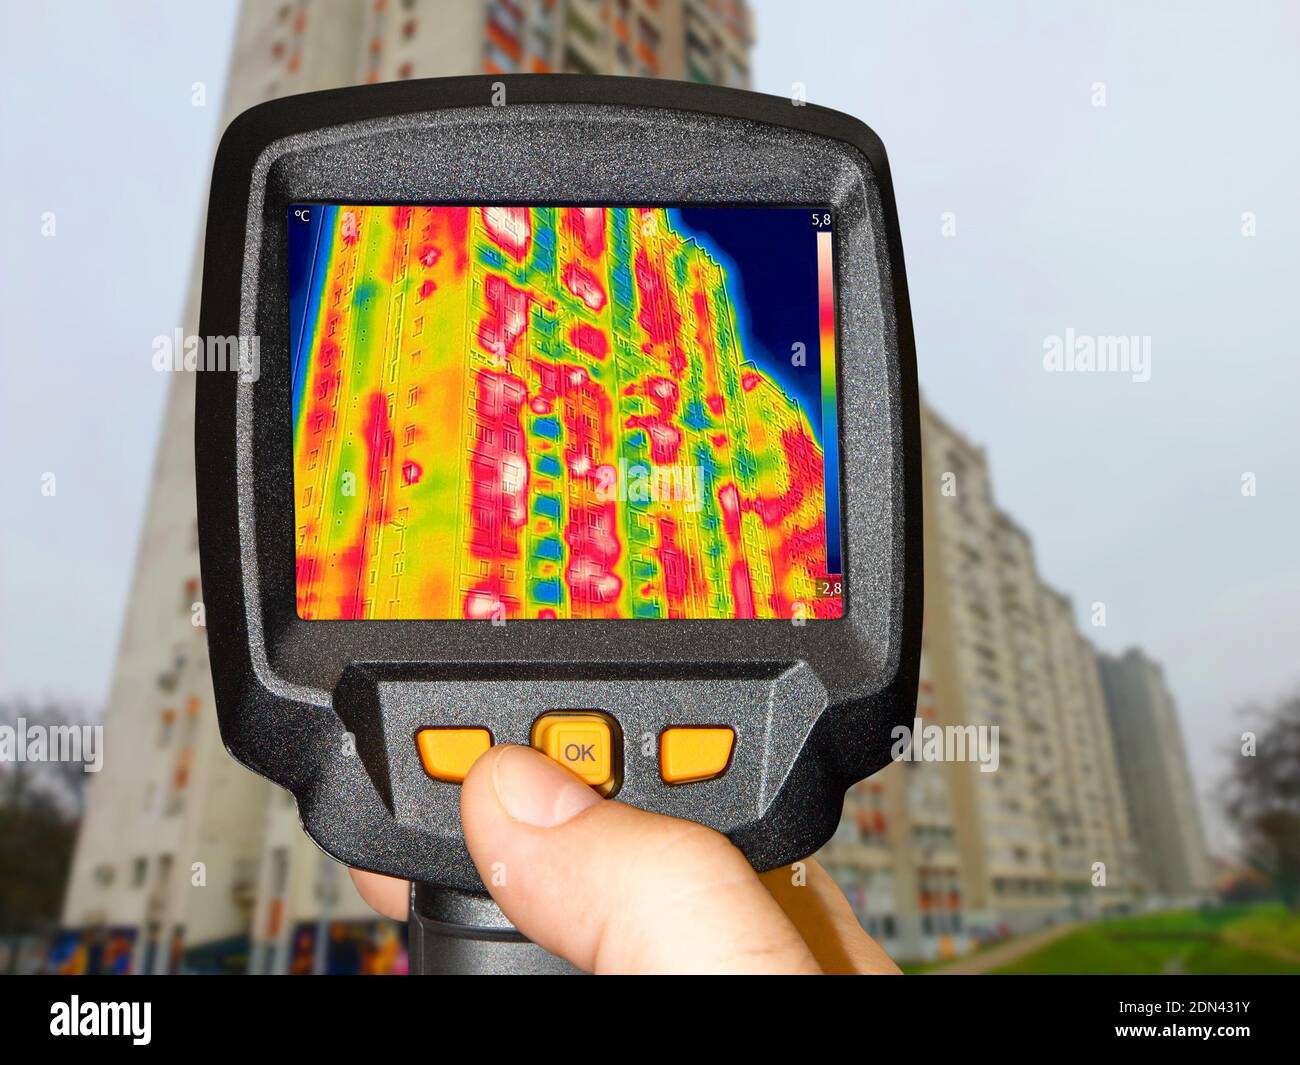 Recording Heat Loss at the Residential building, With Thermal Camera Stock Photo